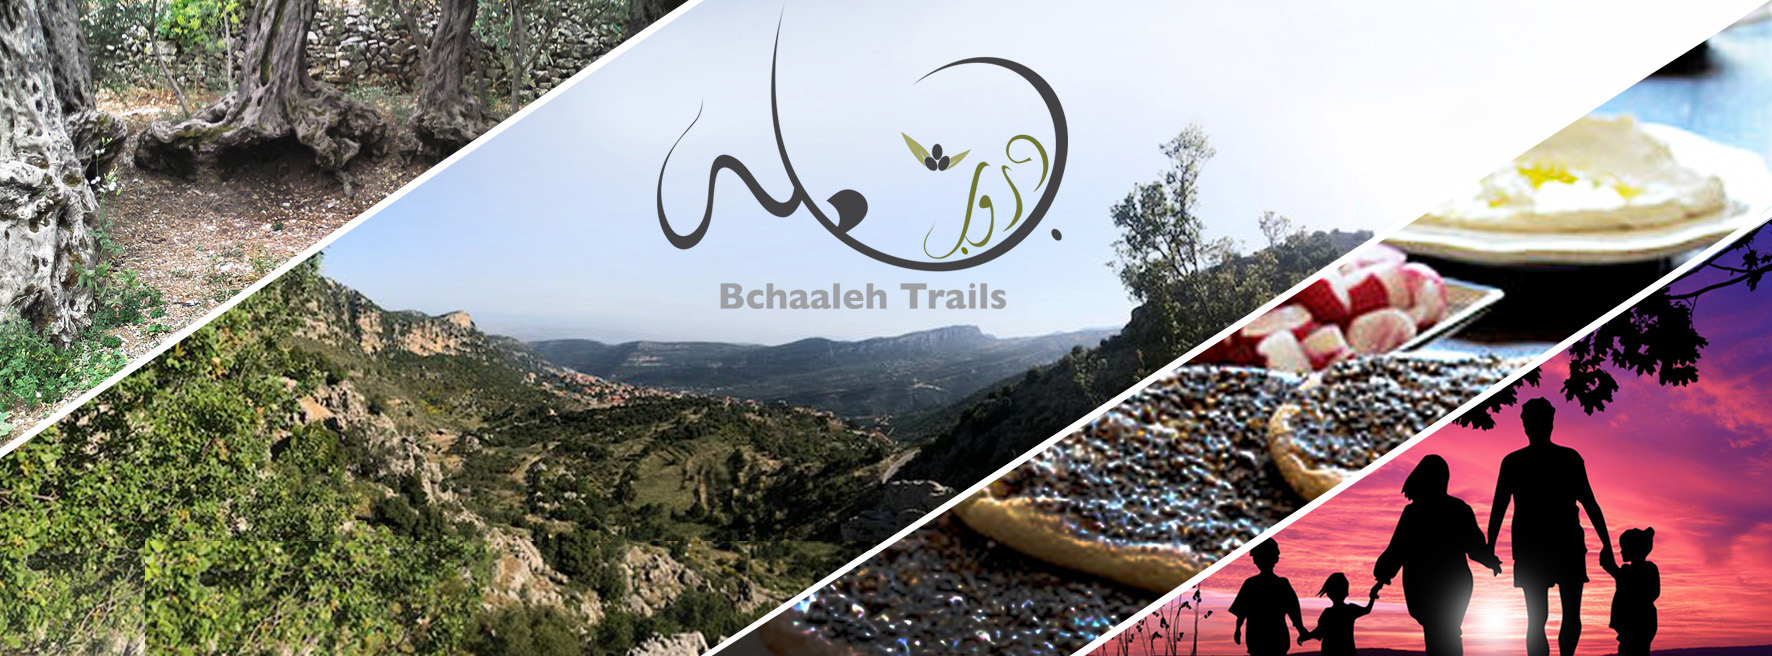 HIKING with Bchaaleh Trails 